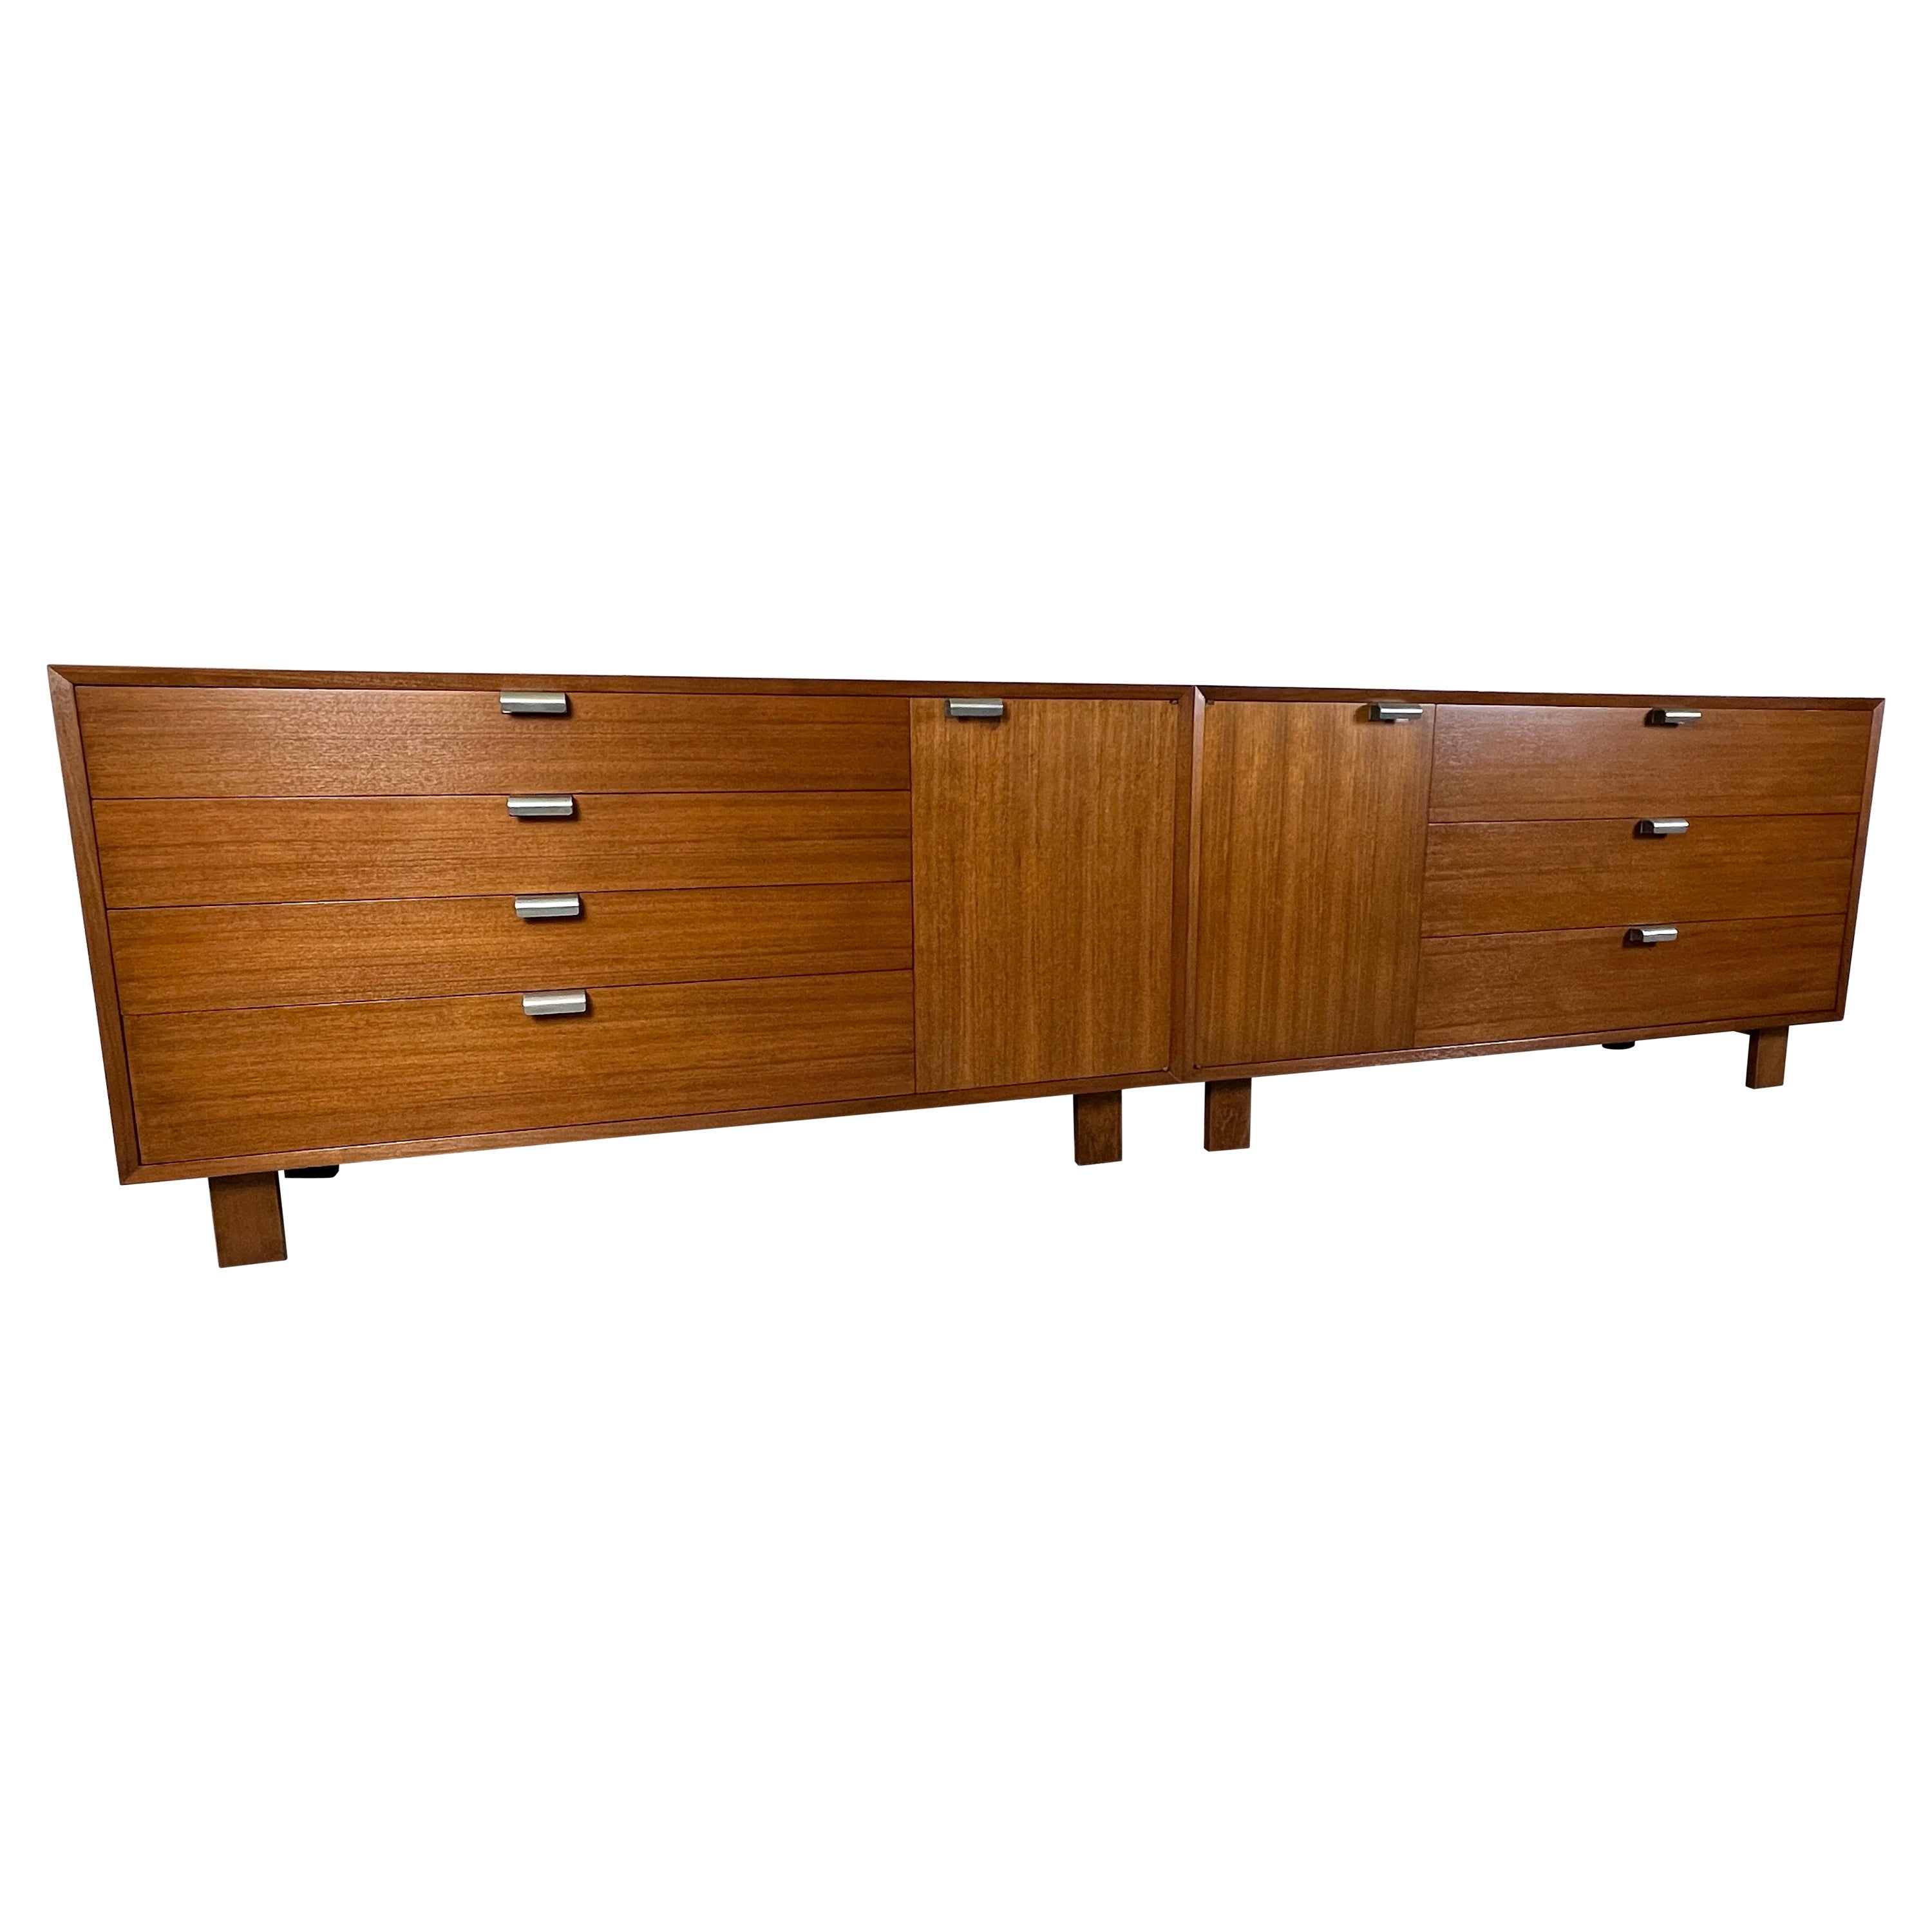 George Nelson for Herman Miller Credenza's